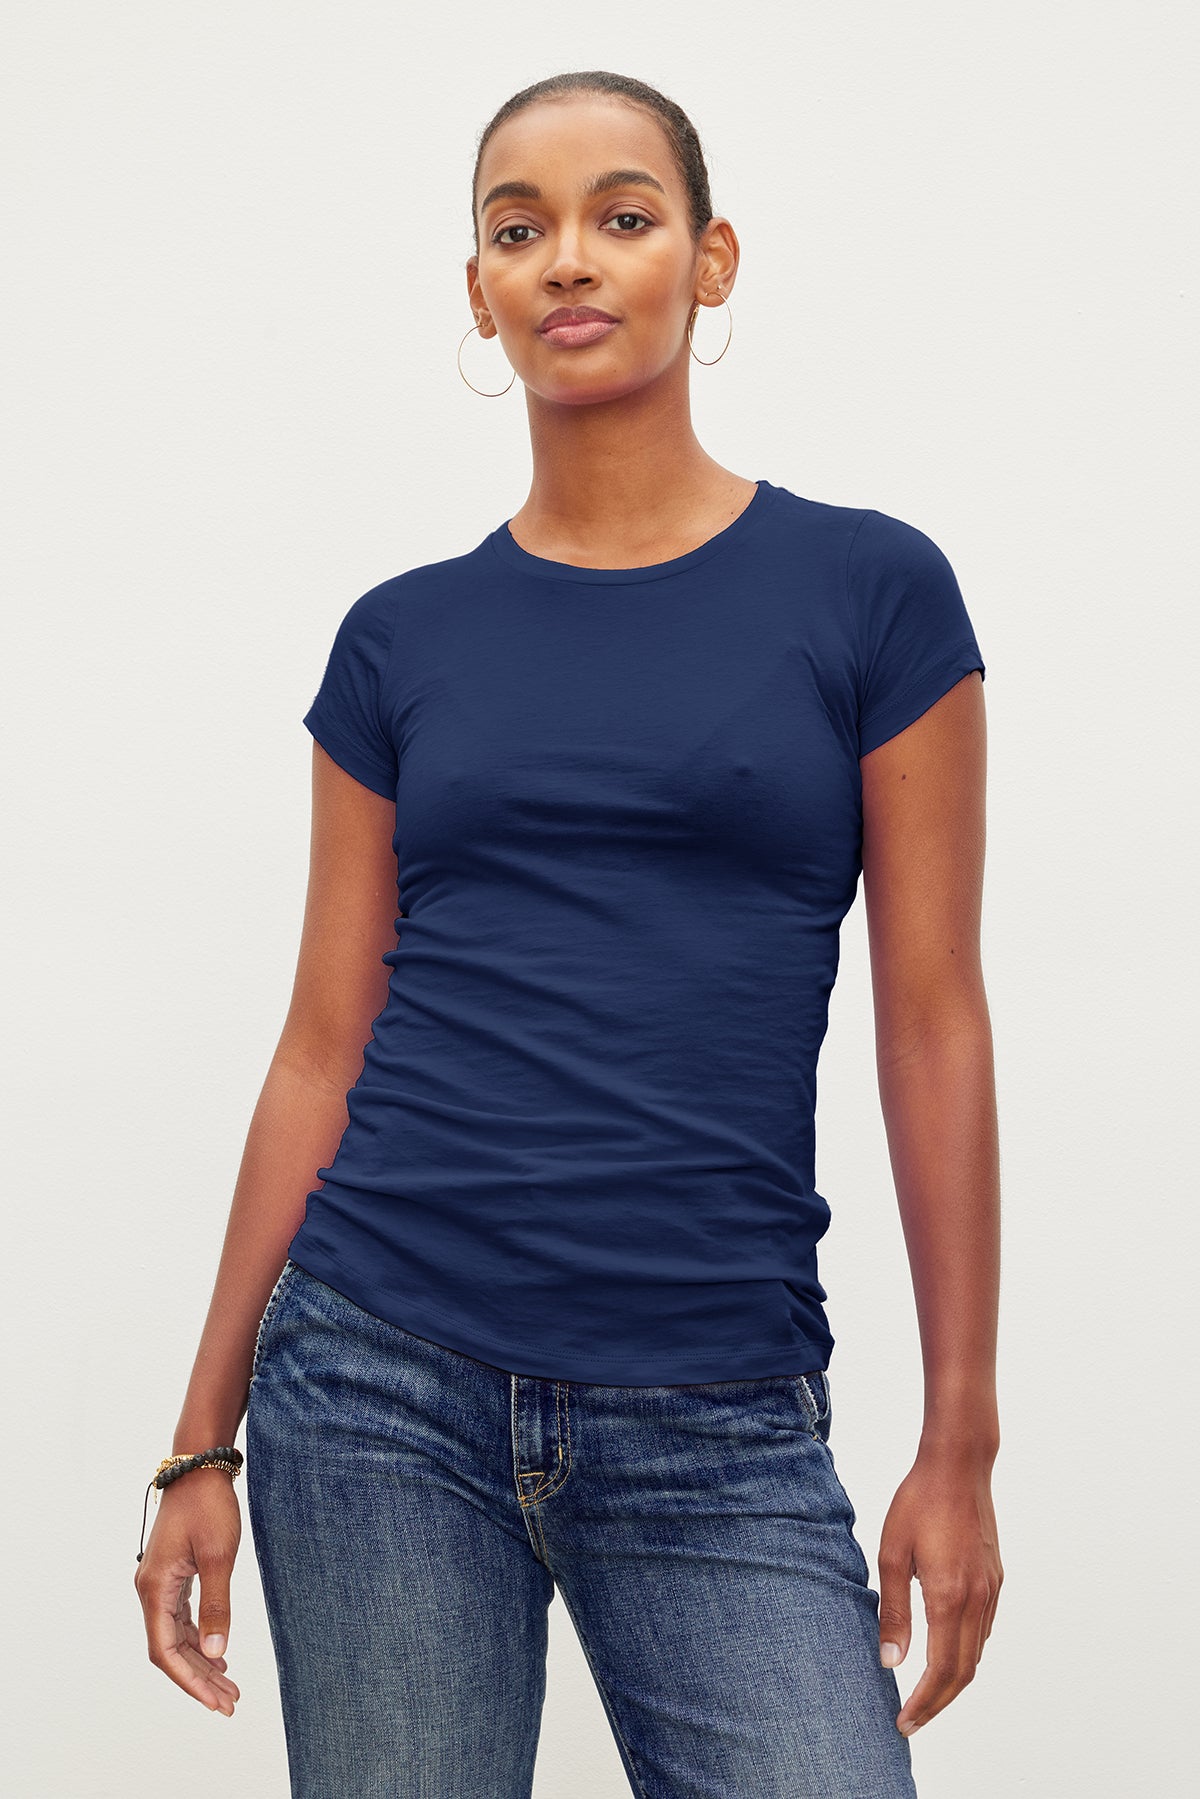 A person wearing a JEMMA GAUZY WHISPER FITTED CREW NECK TEE by Velvet by Graham & Spencer and jeans.-35571890782401